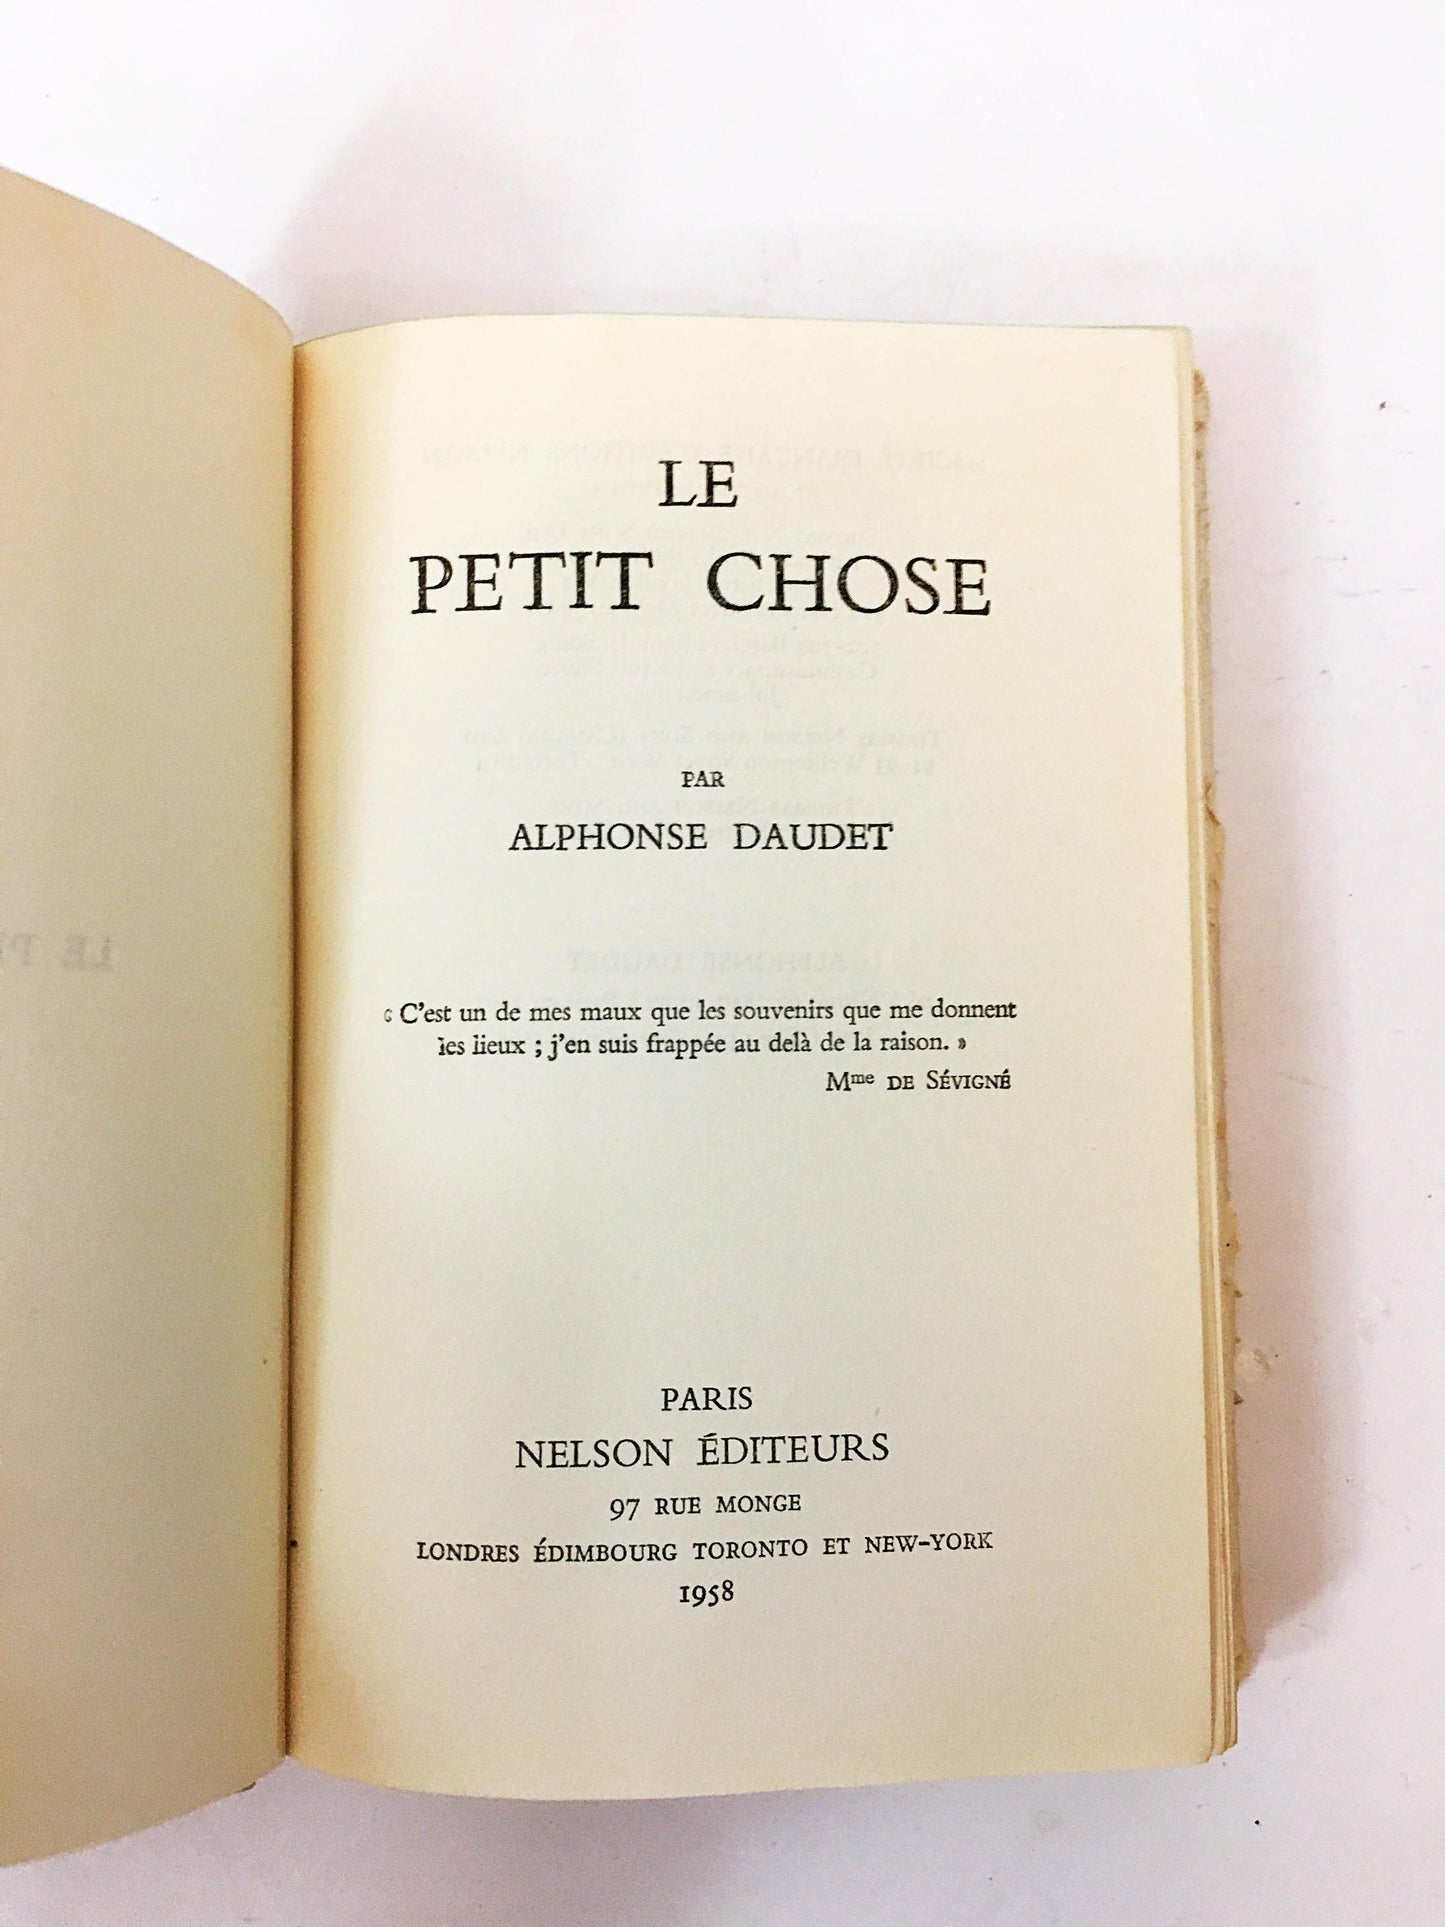 Le Petit Chose Vintage French book by Daudet Alphonse circa 1958. Autobiographical memoir Little Good-For-Nothing. White book decor. Gift